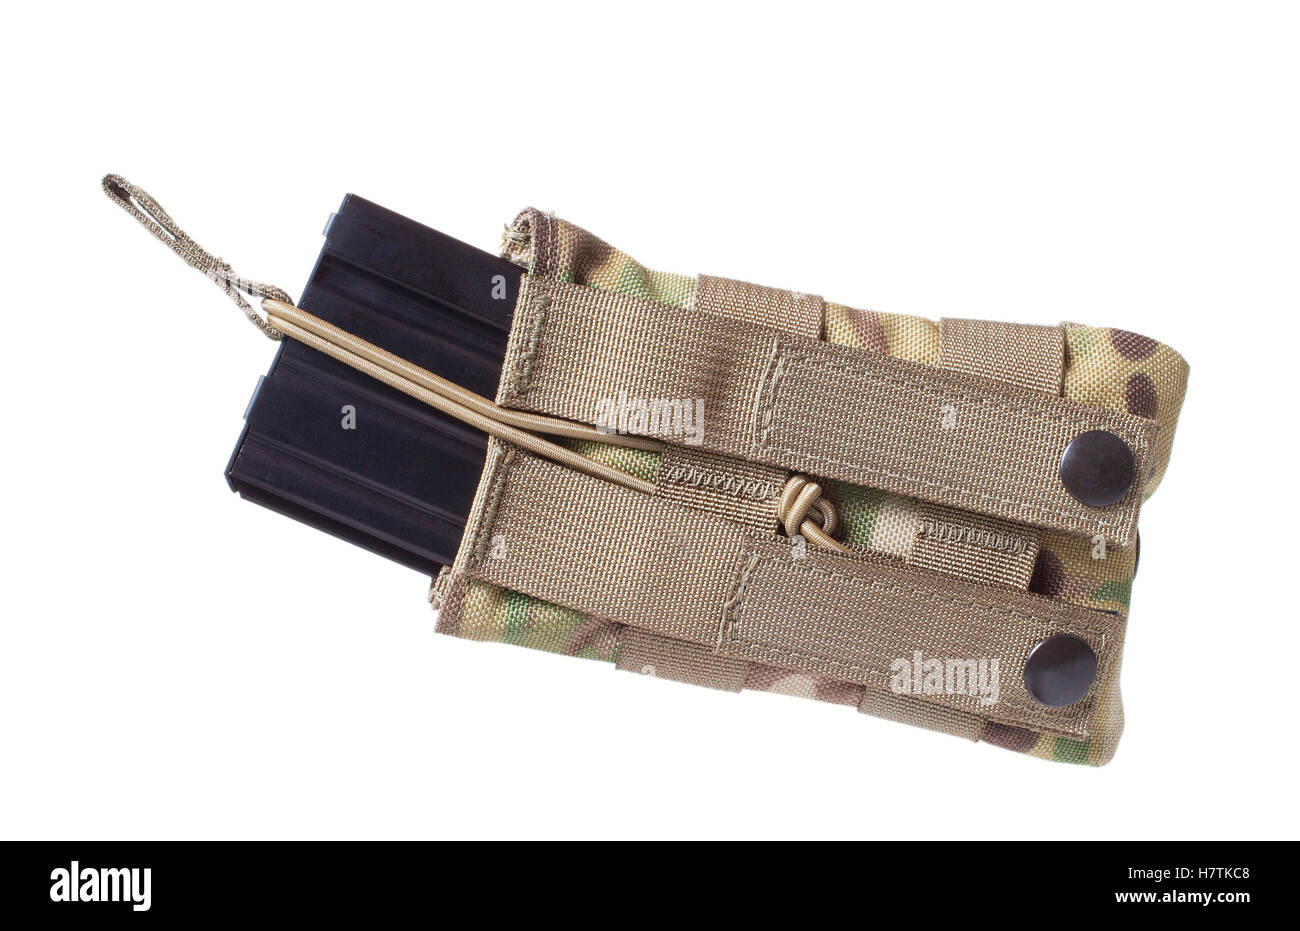 Camouflage AR-15 magazine pouch and magazine isolated on white Stock Photo